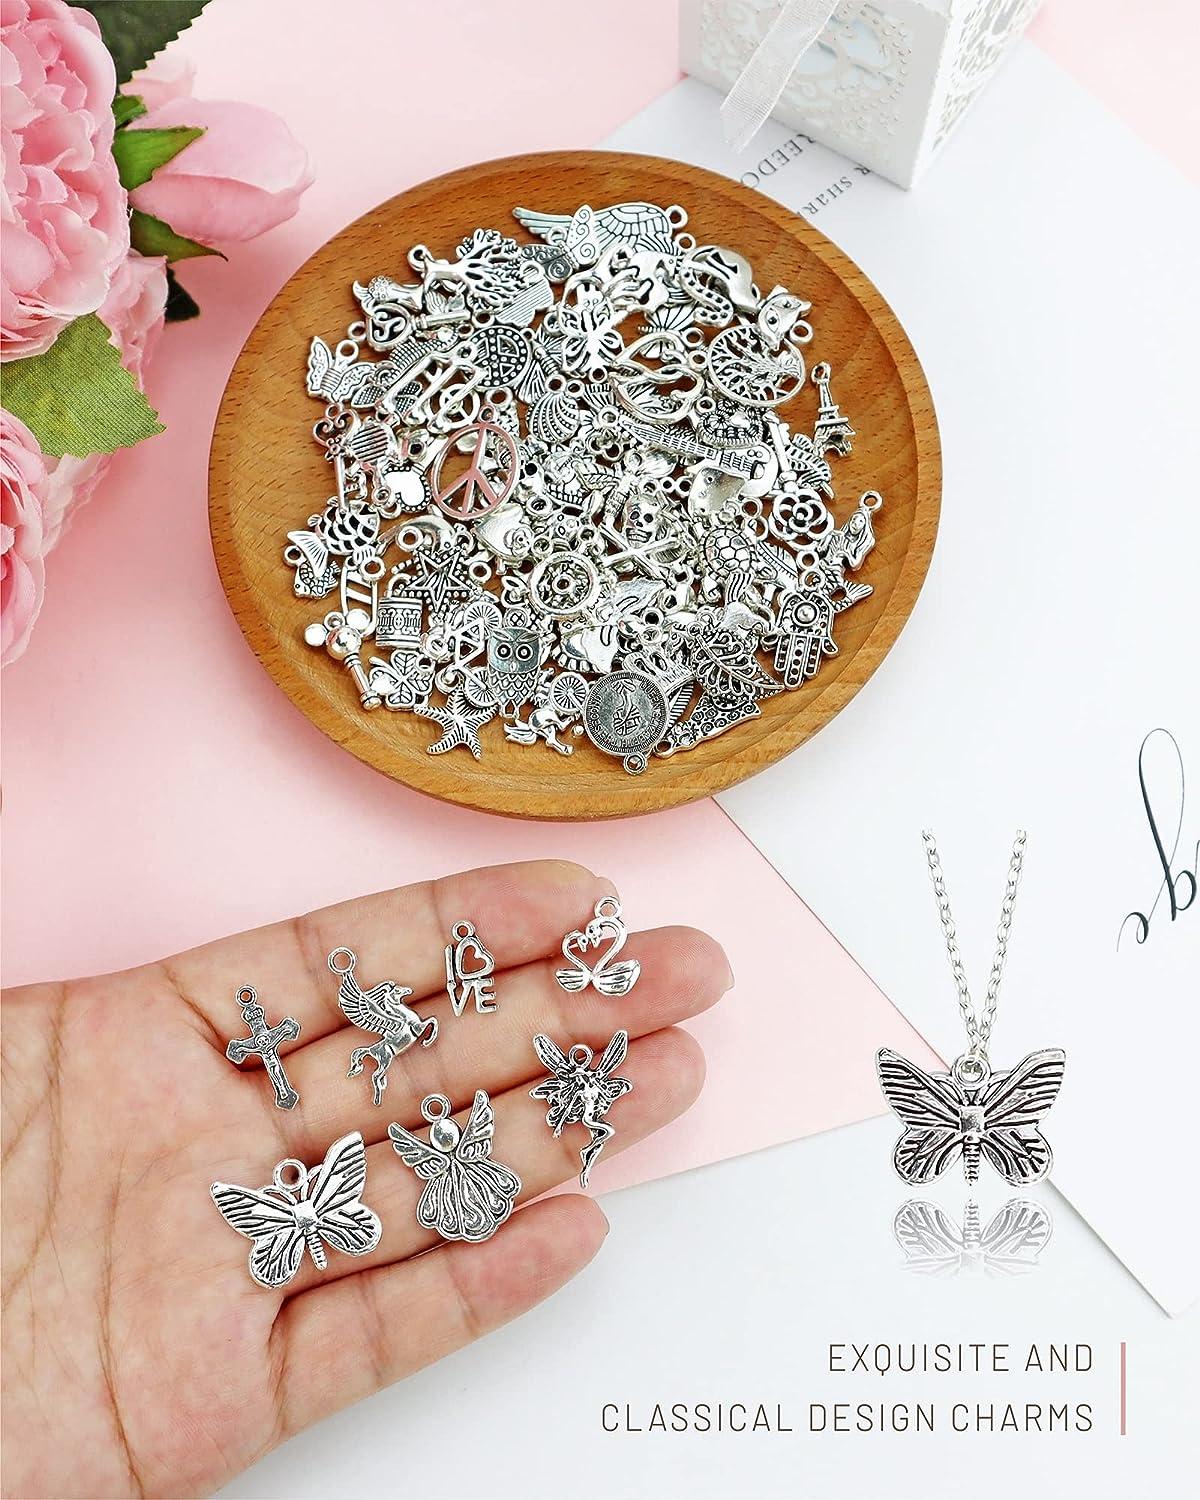 Wholesale Bulk Lots Jewelry Making Charms Mixed Smooth Metal Charms Pendants DIY for Necklace Bracelet Crafts 100 Grams, Women's, Silver